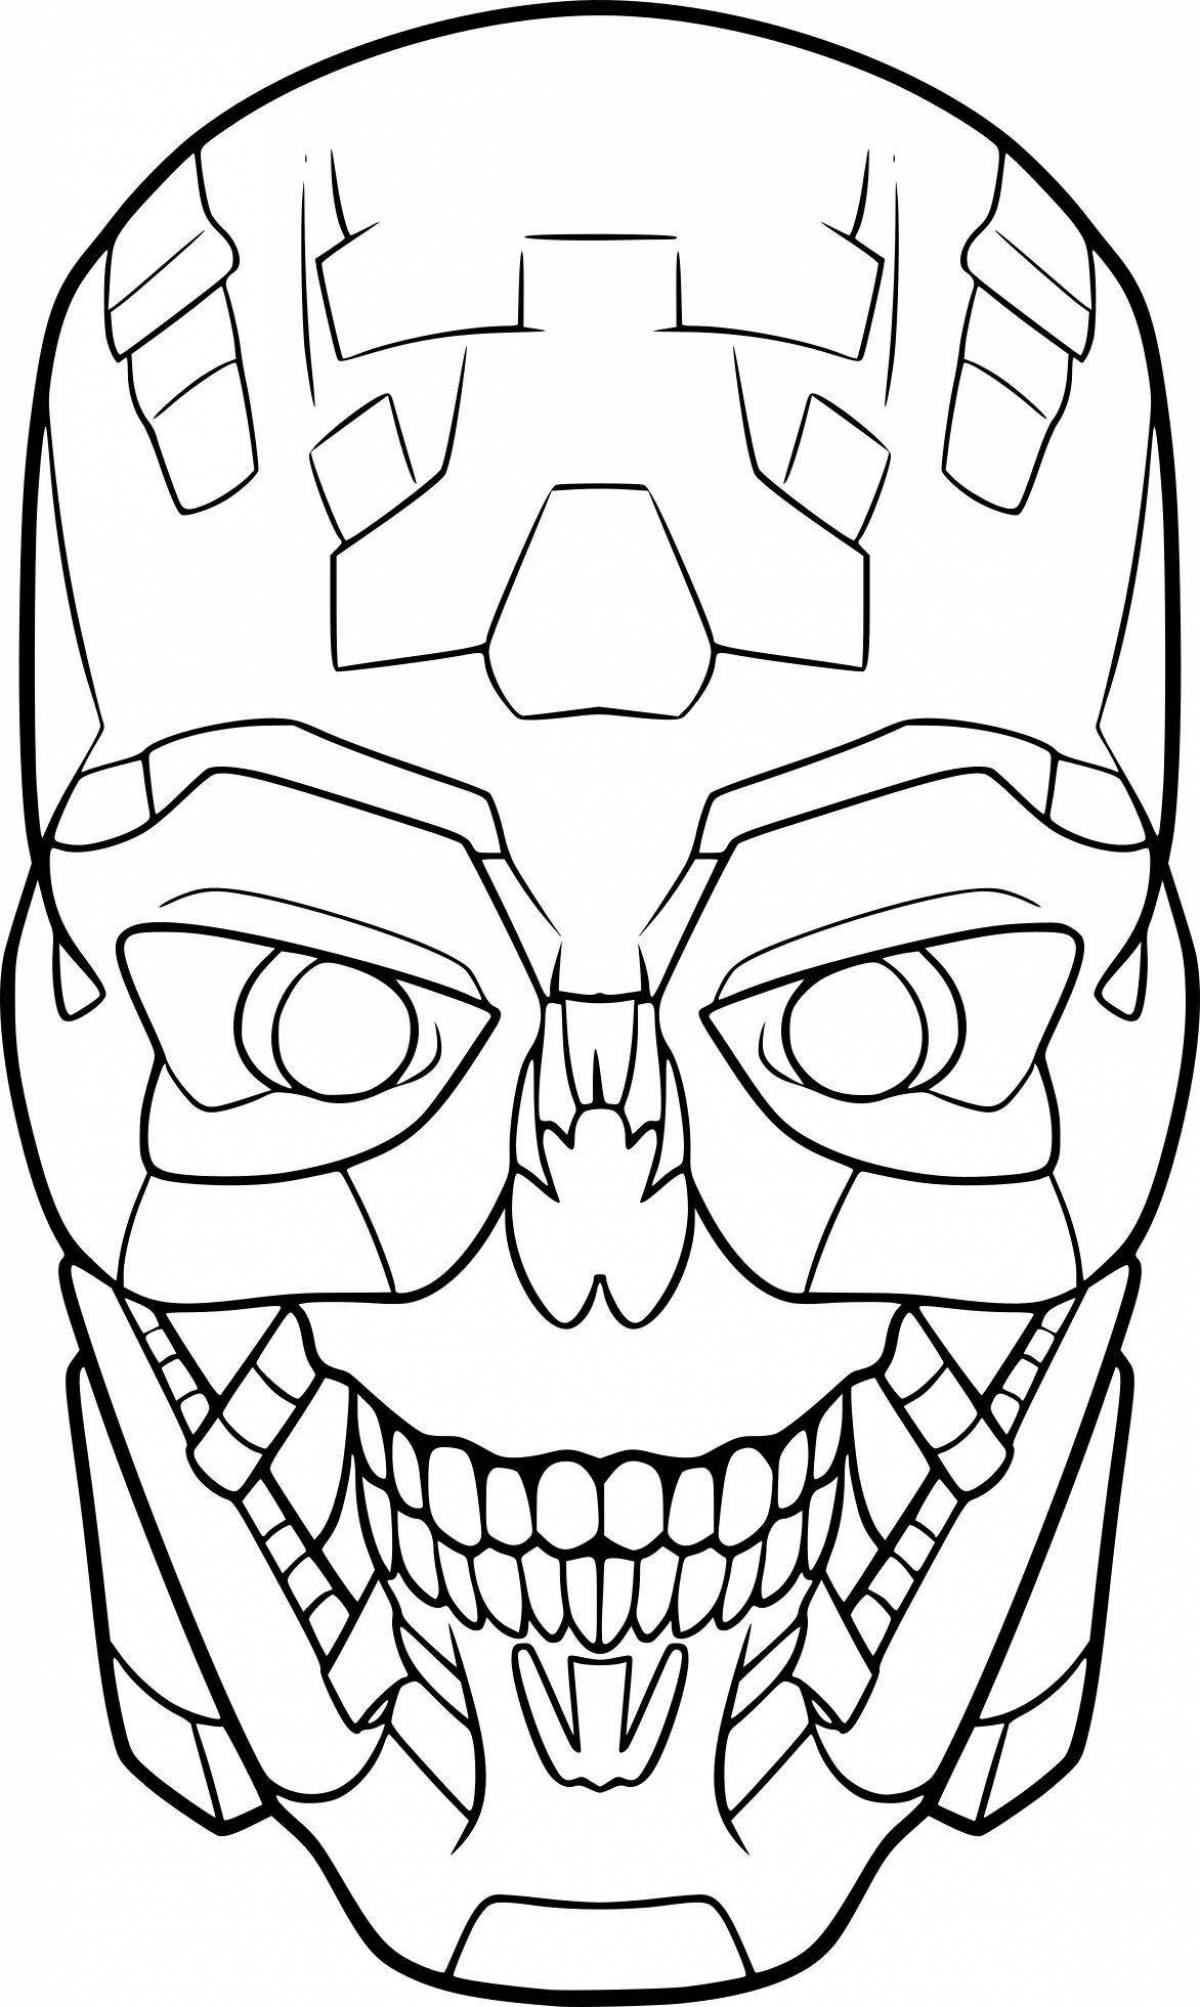 Exciting robot mask coloring page